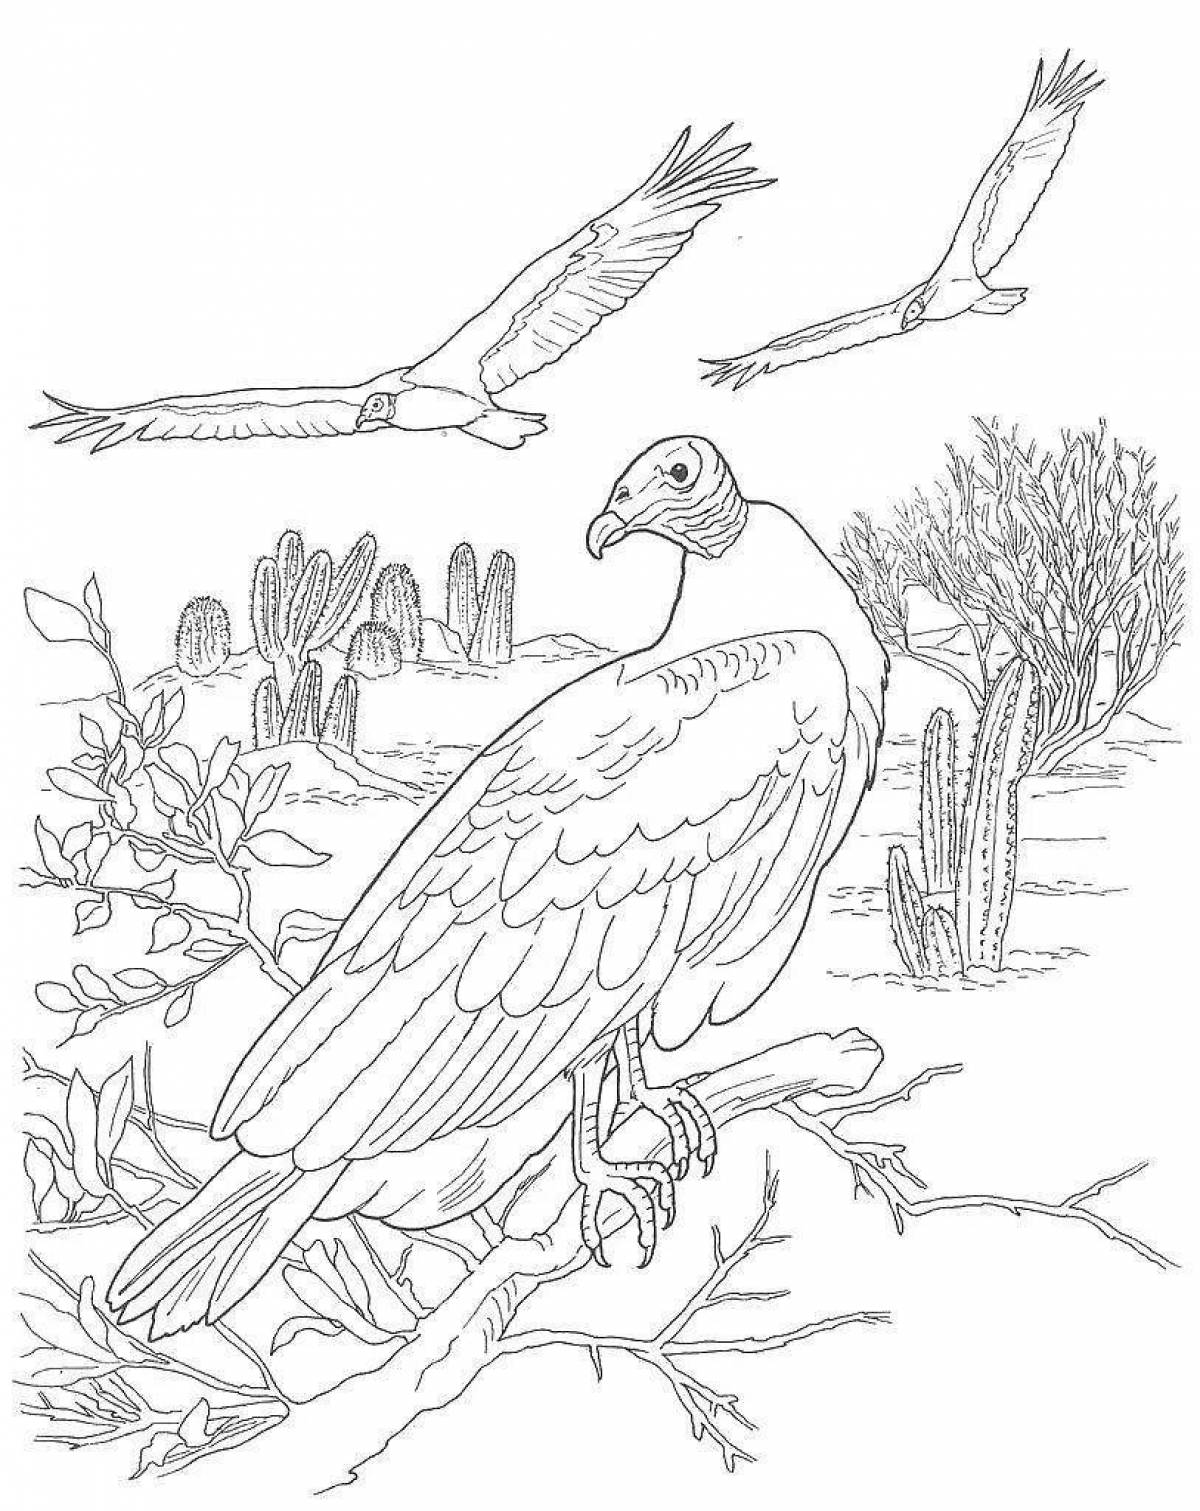 Glitter vulture coloring page